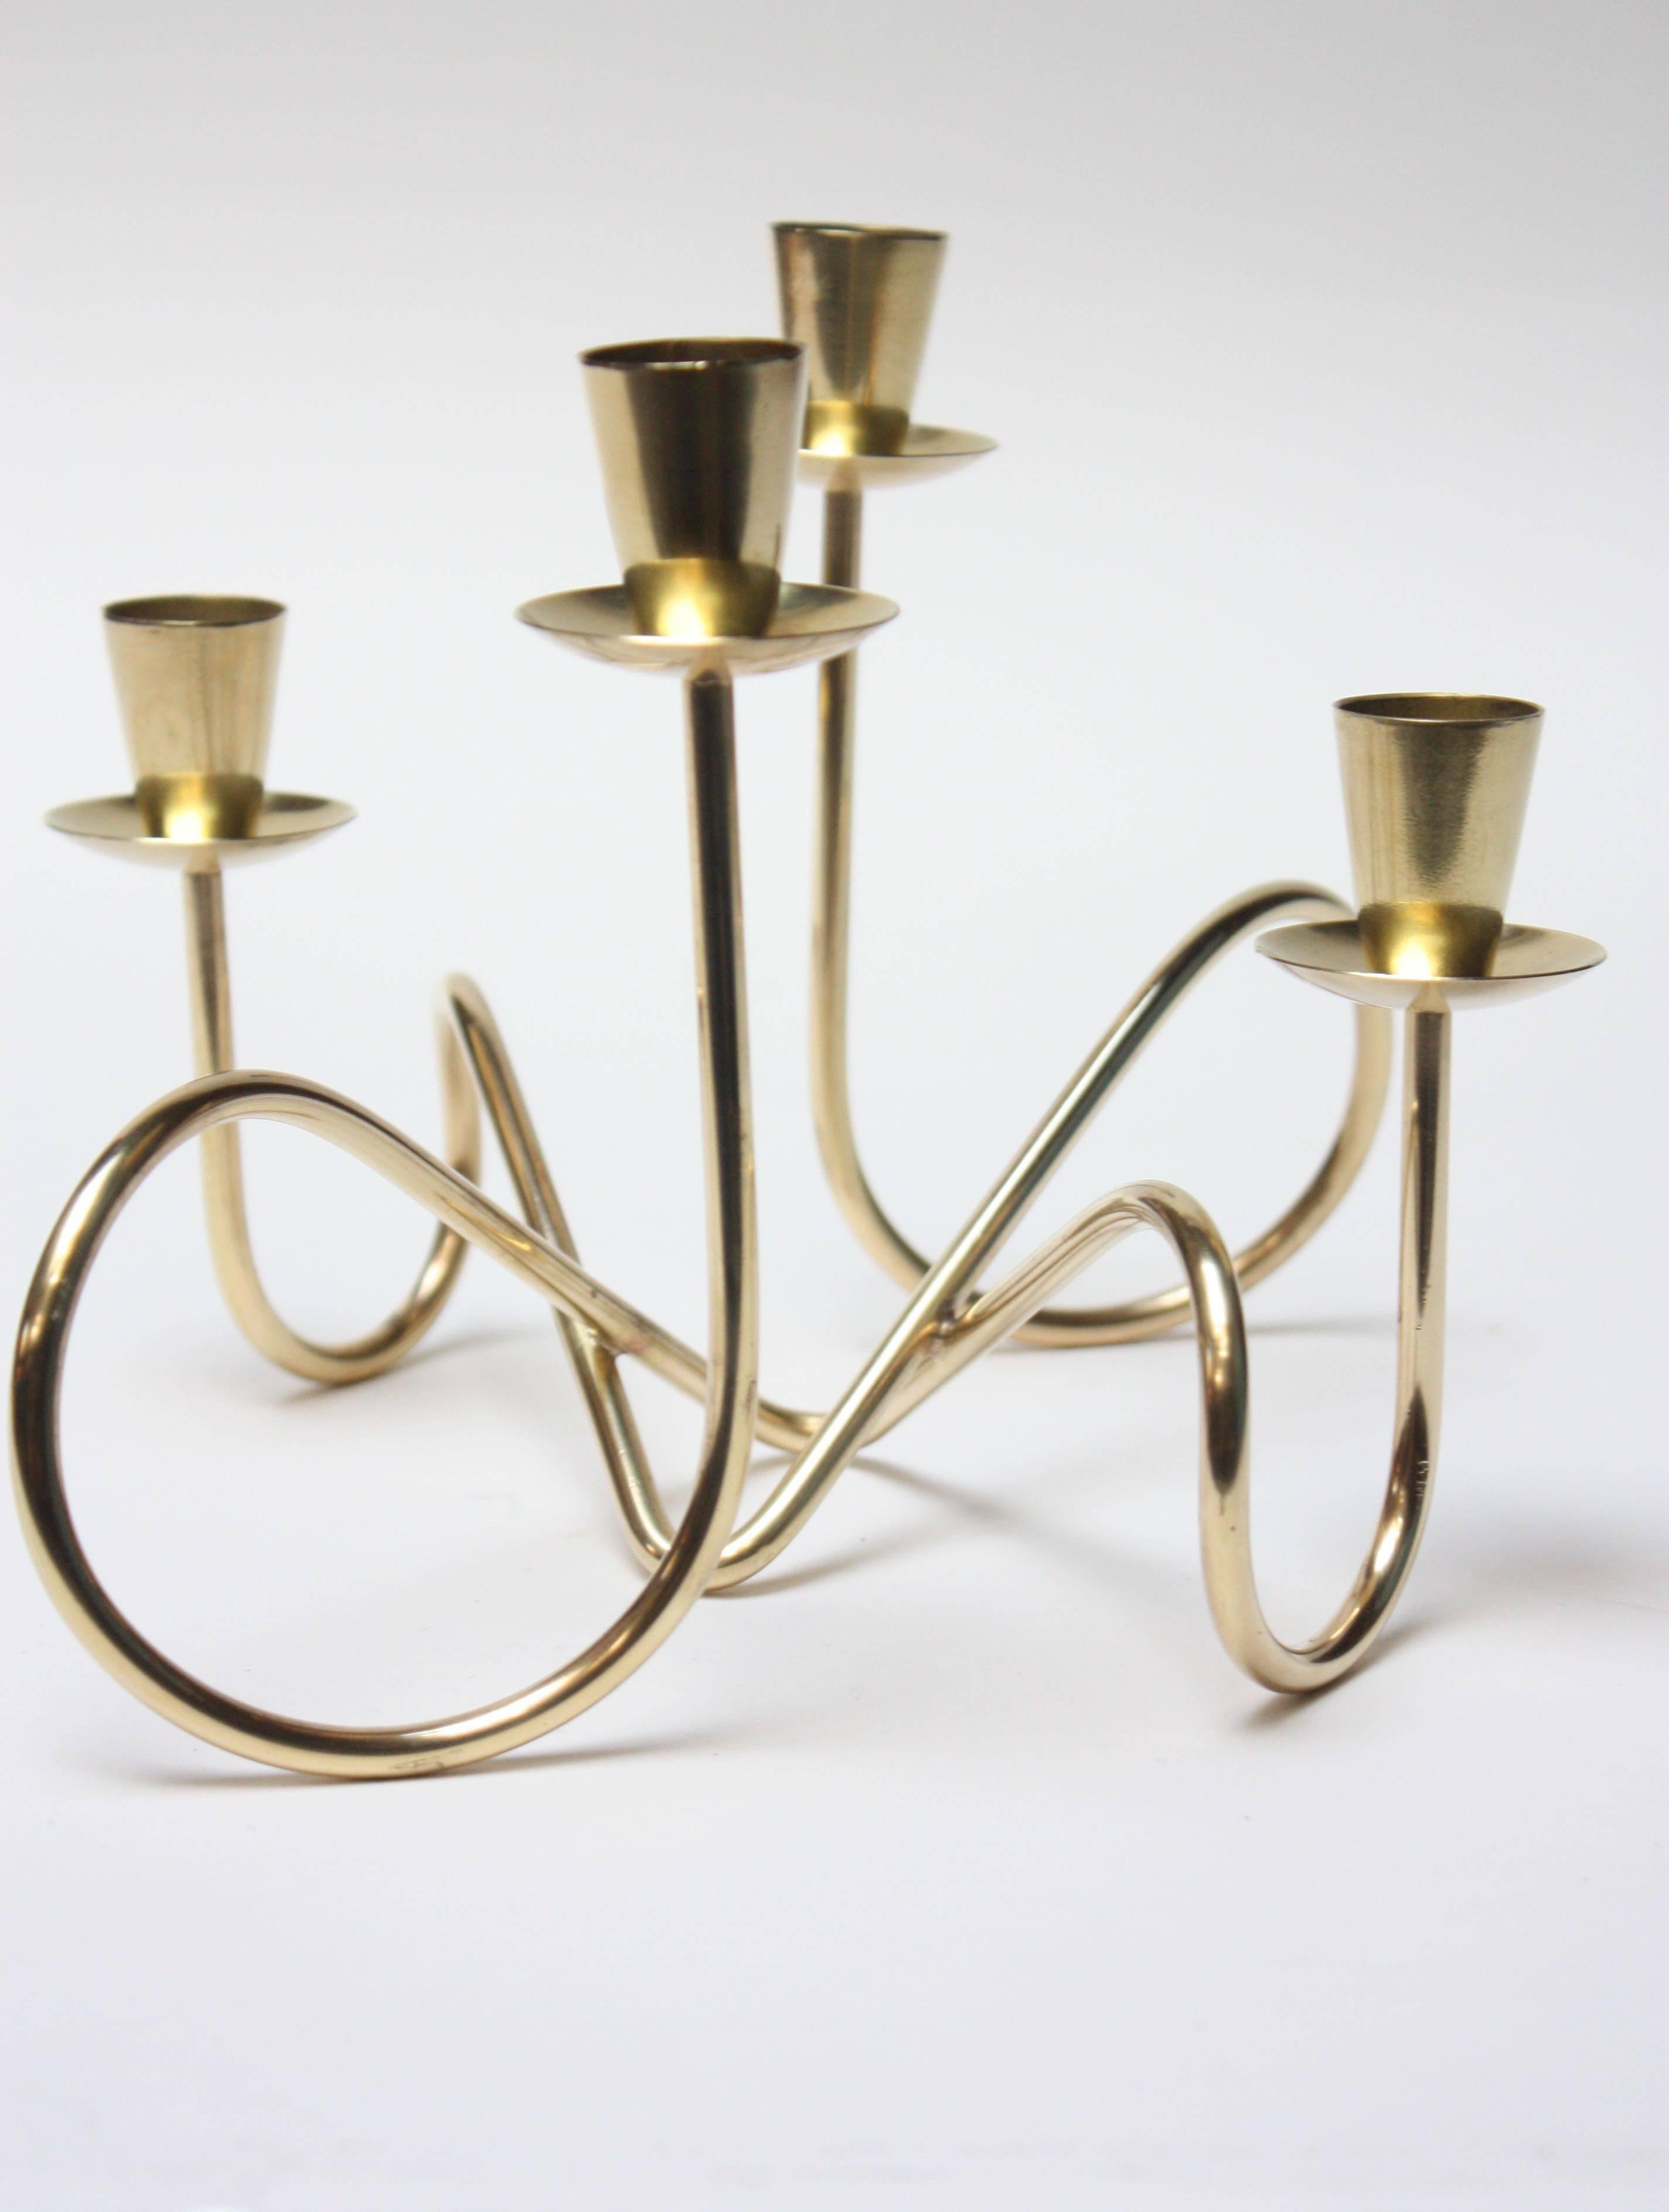 Elegant decorative object composed of two entwined brass candleholders to form one, larger sculptural candelabra which accommodates four candles. Excellent, polished condition with only the minor traces of use / wear, circa 1950s, Italy (branded